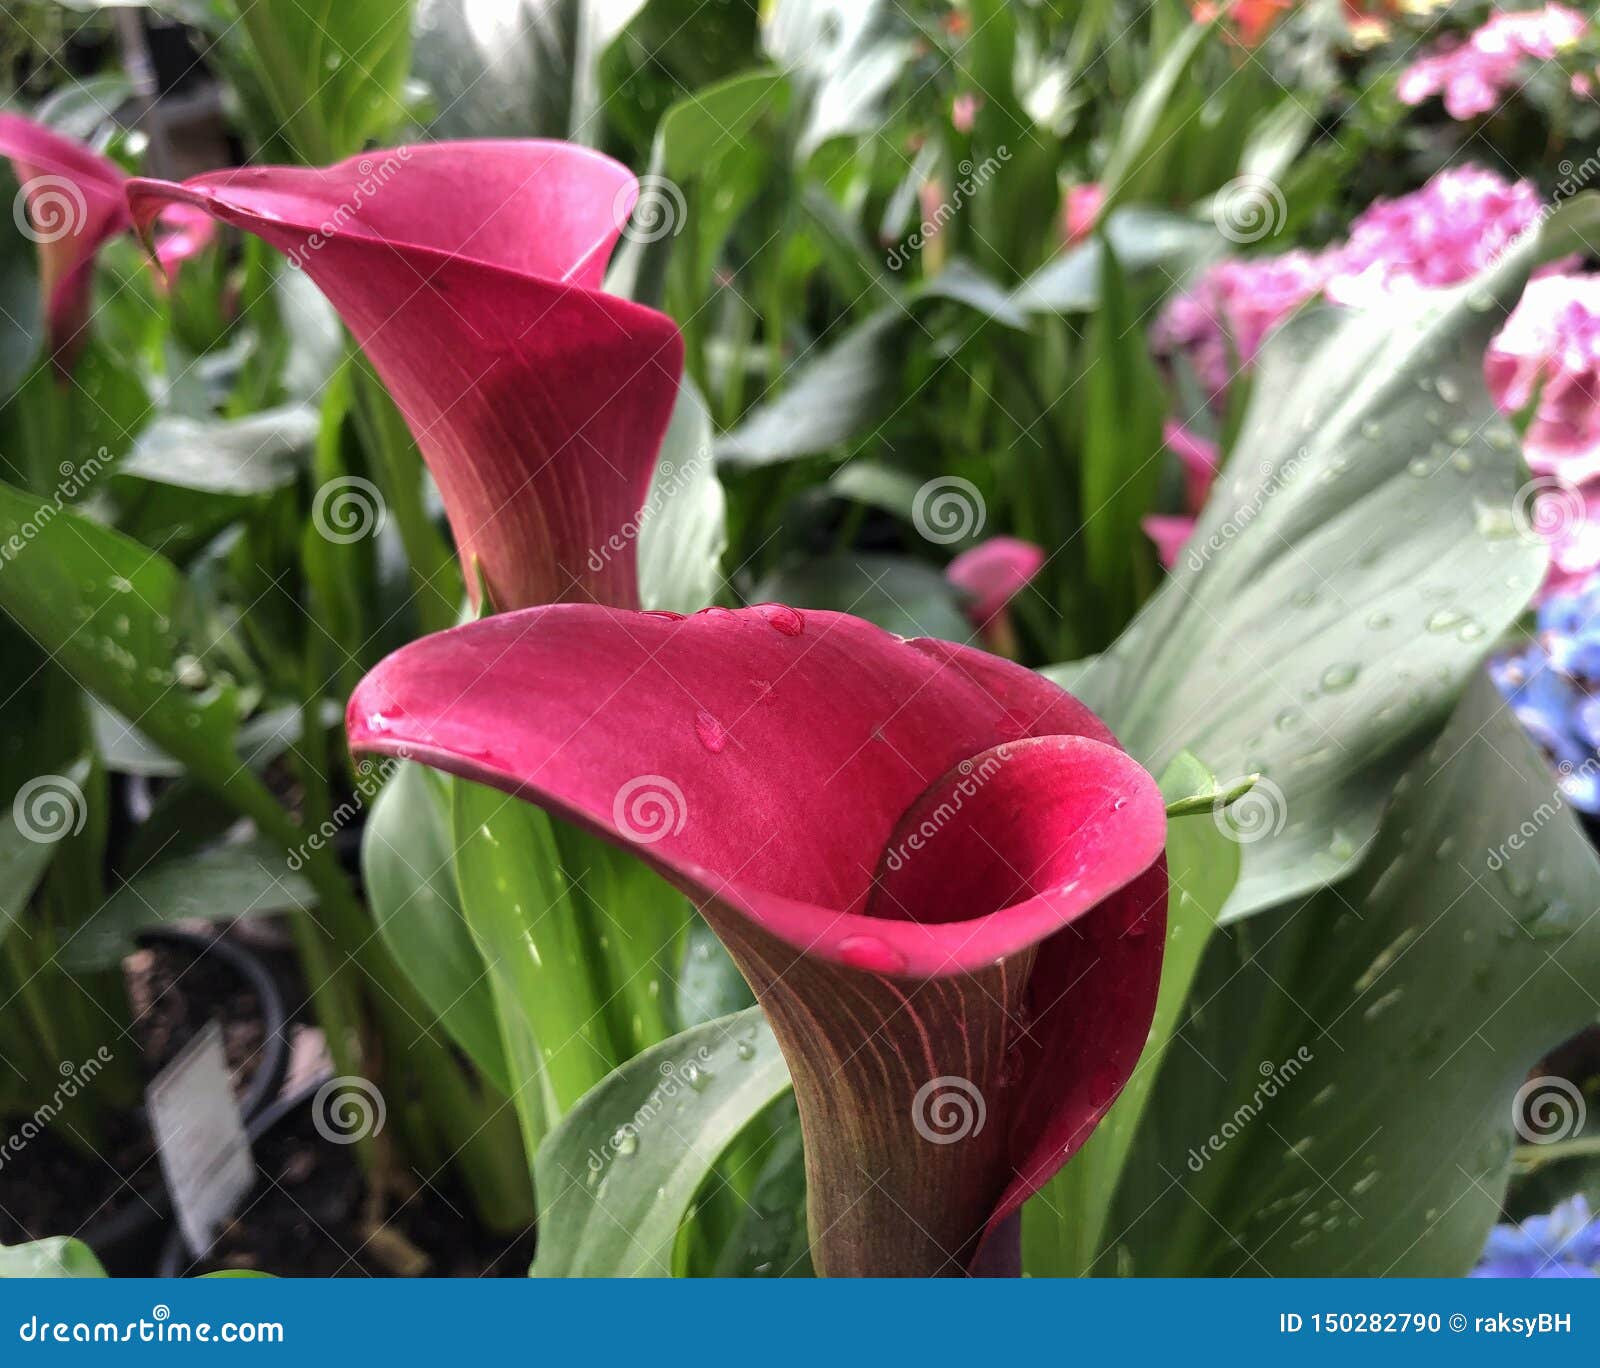 Colorful Calla Lily Flowers Stock Photo - Image of summer, gardening ...